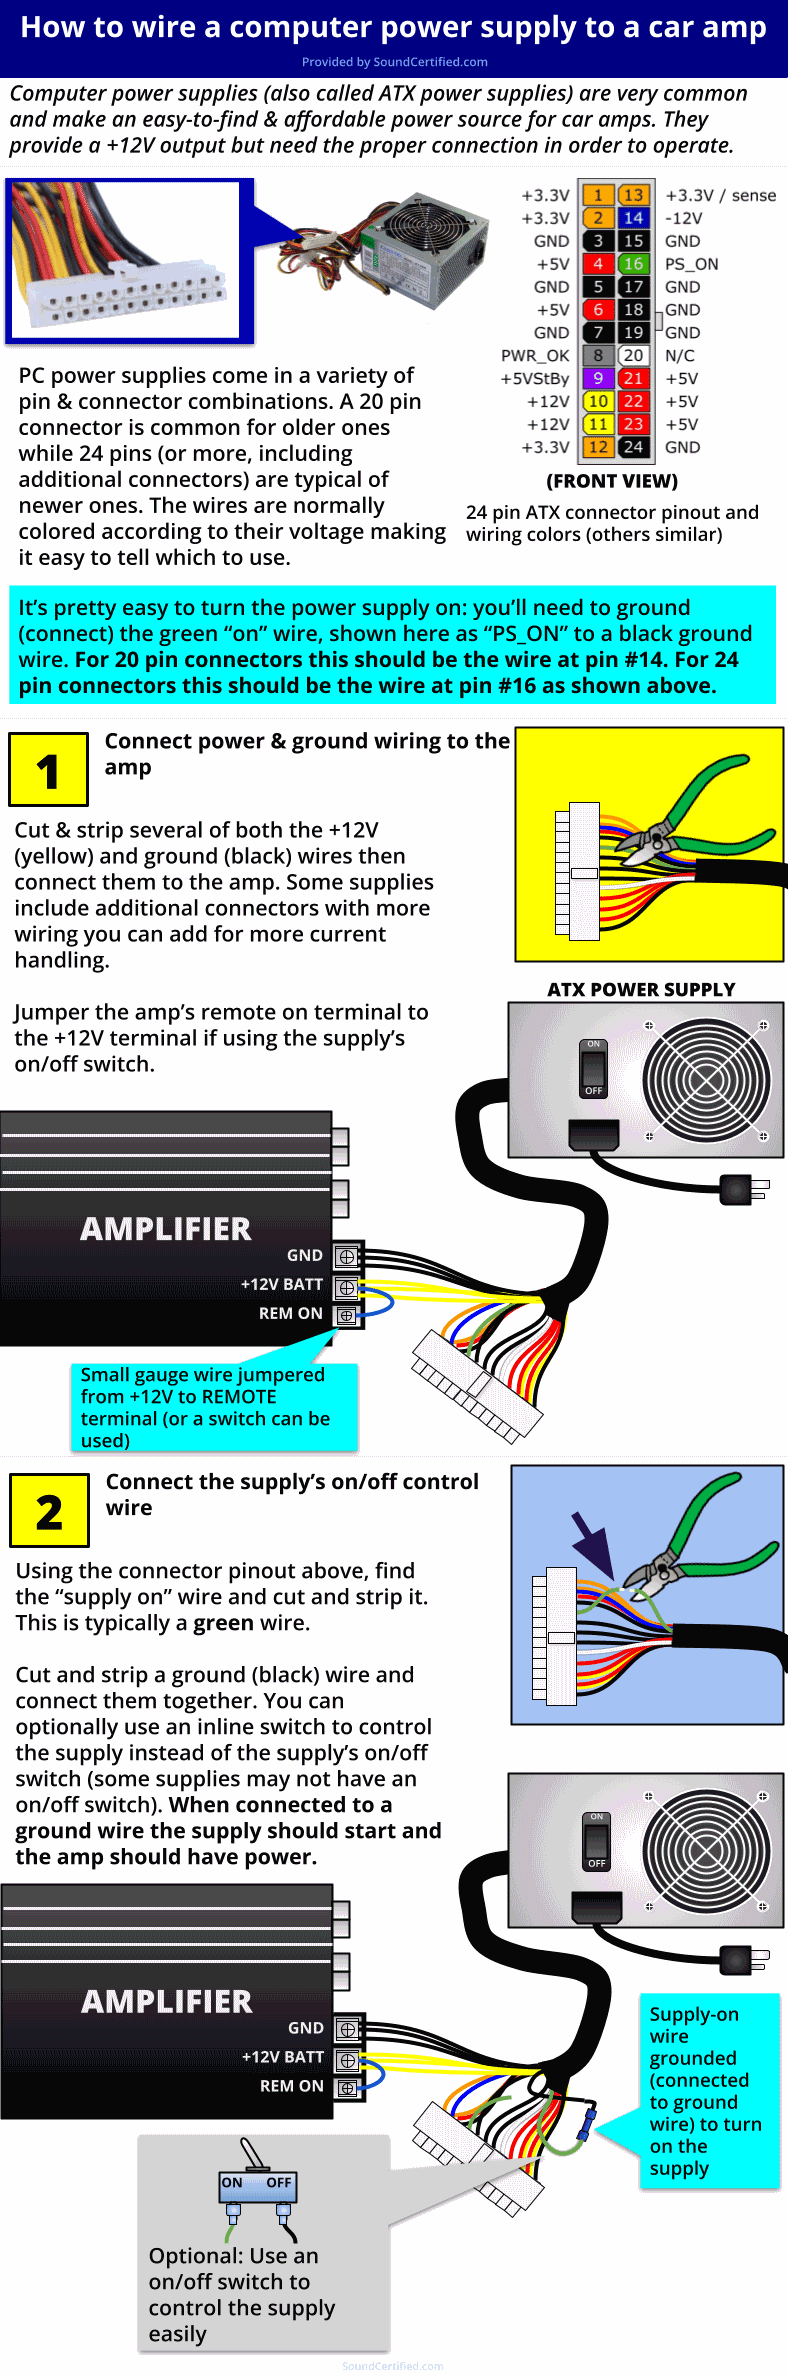 How To Wire A Computer Power Supply To A Car Amp